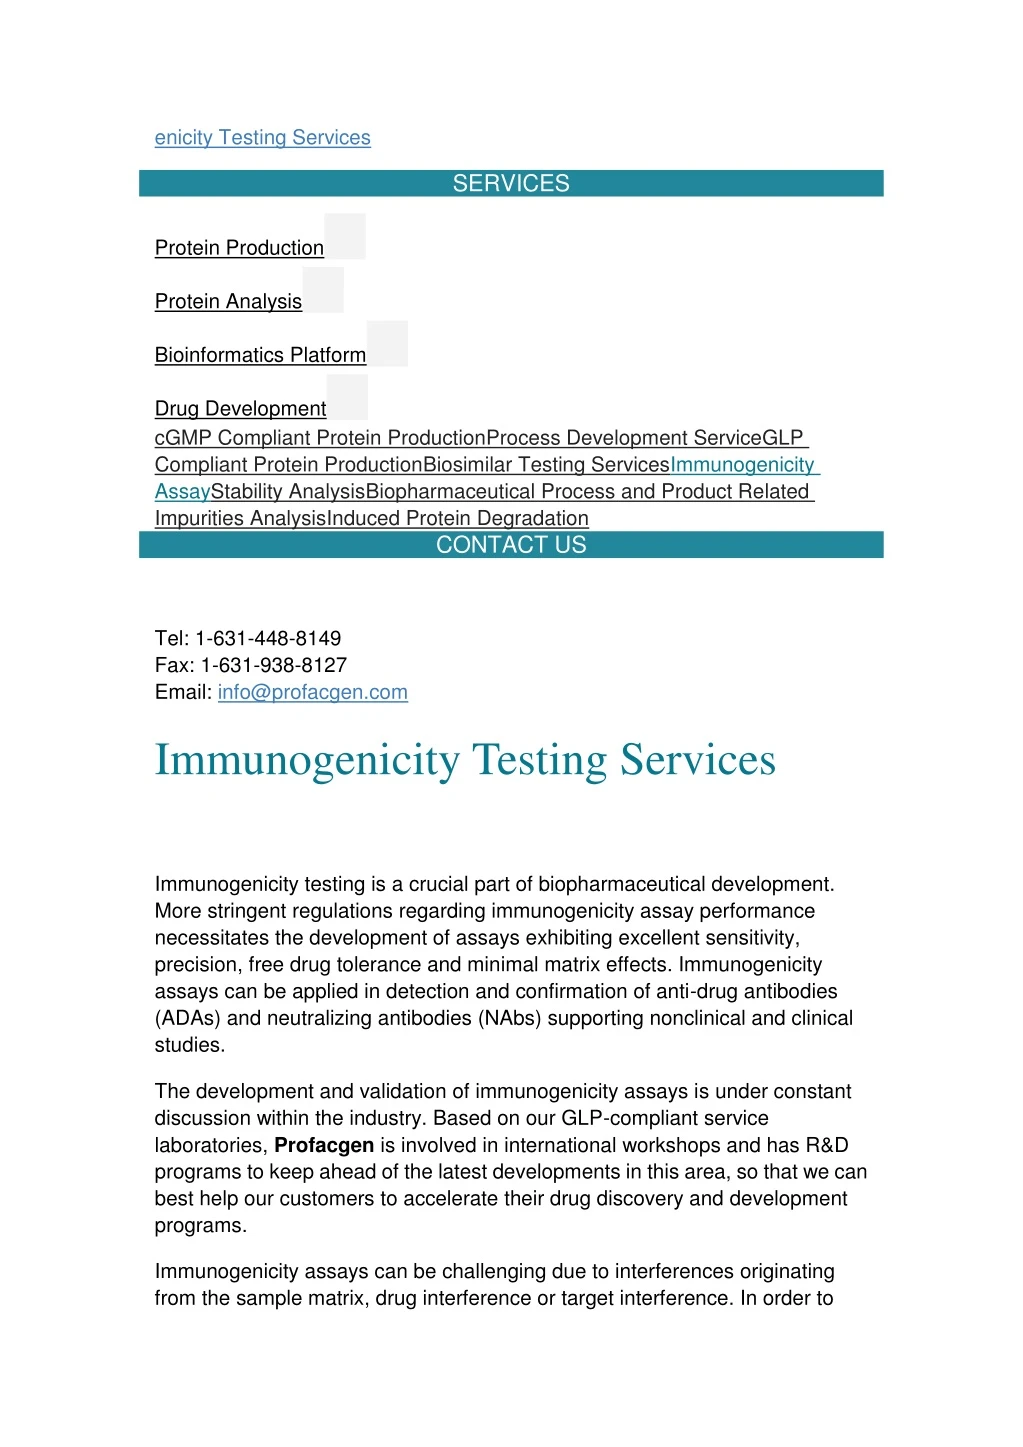 enicity testing services